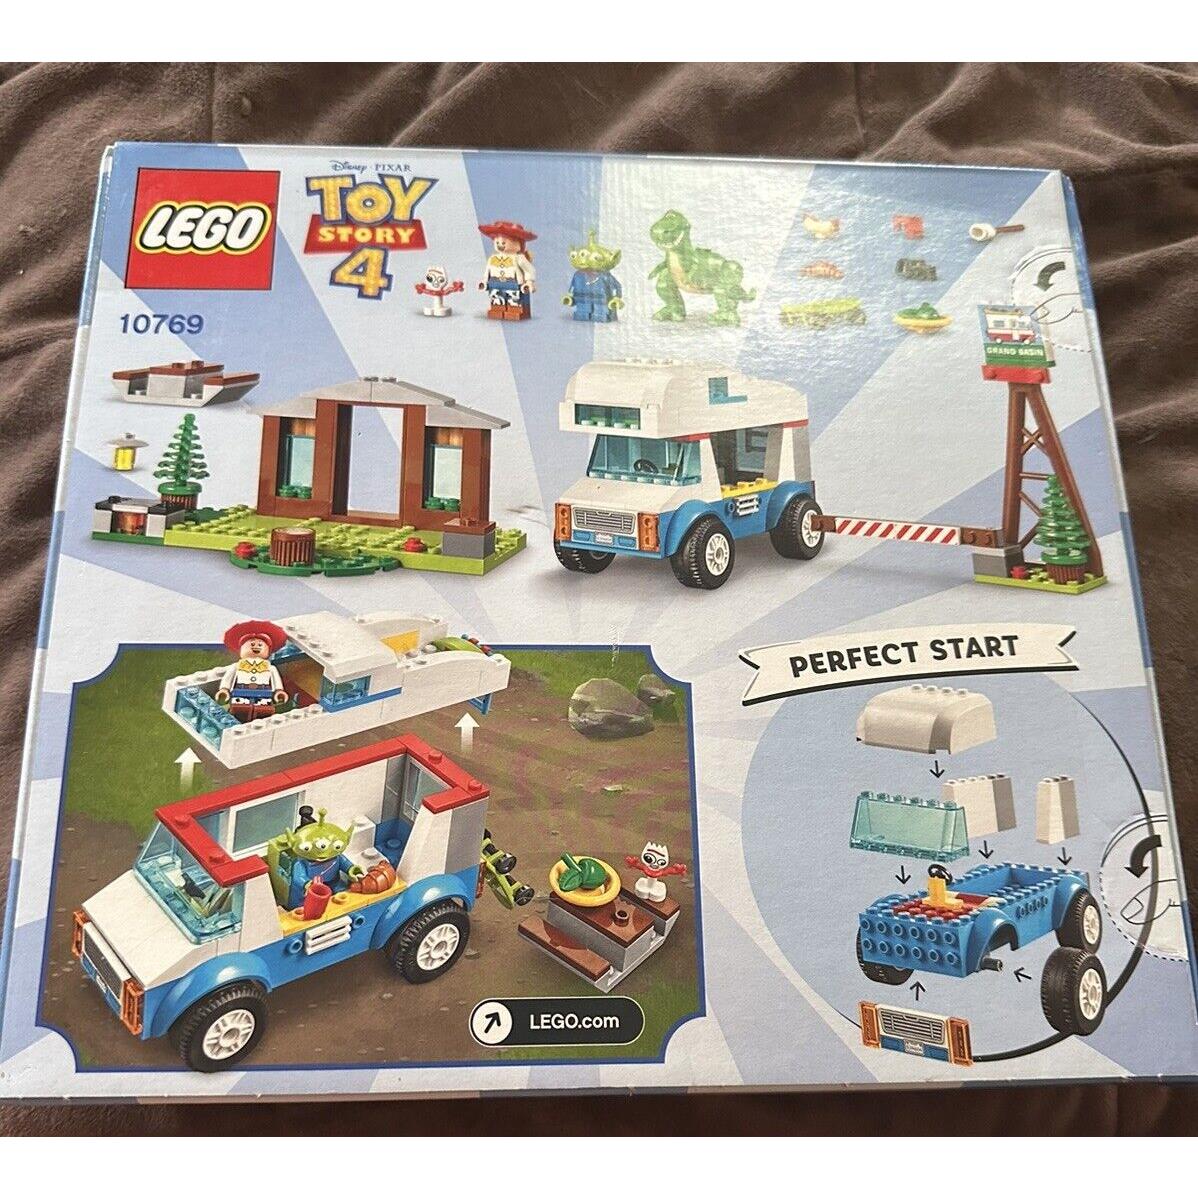 Lego Toy Story 4 RV Vacation - 10769 - Building Kit 178 Pcs Retired